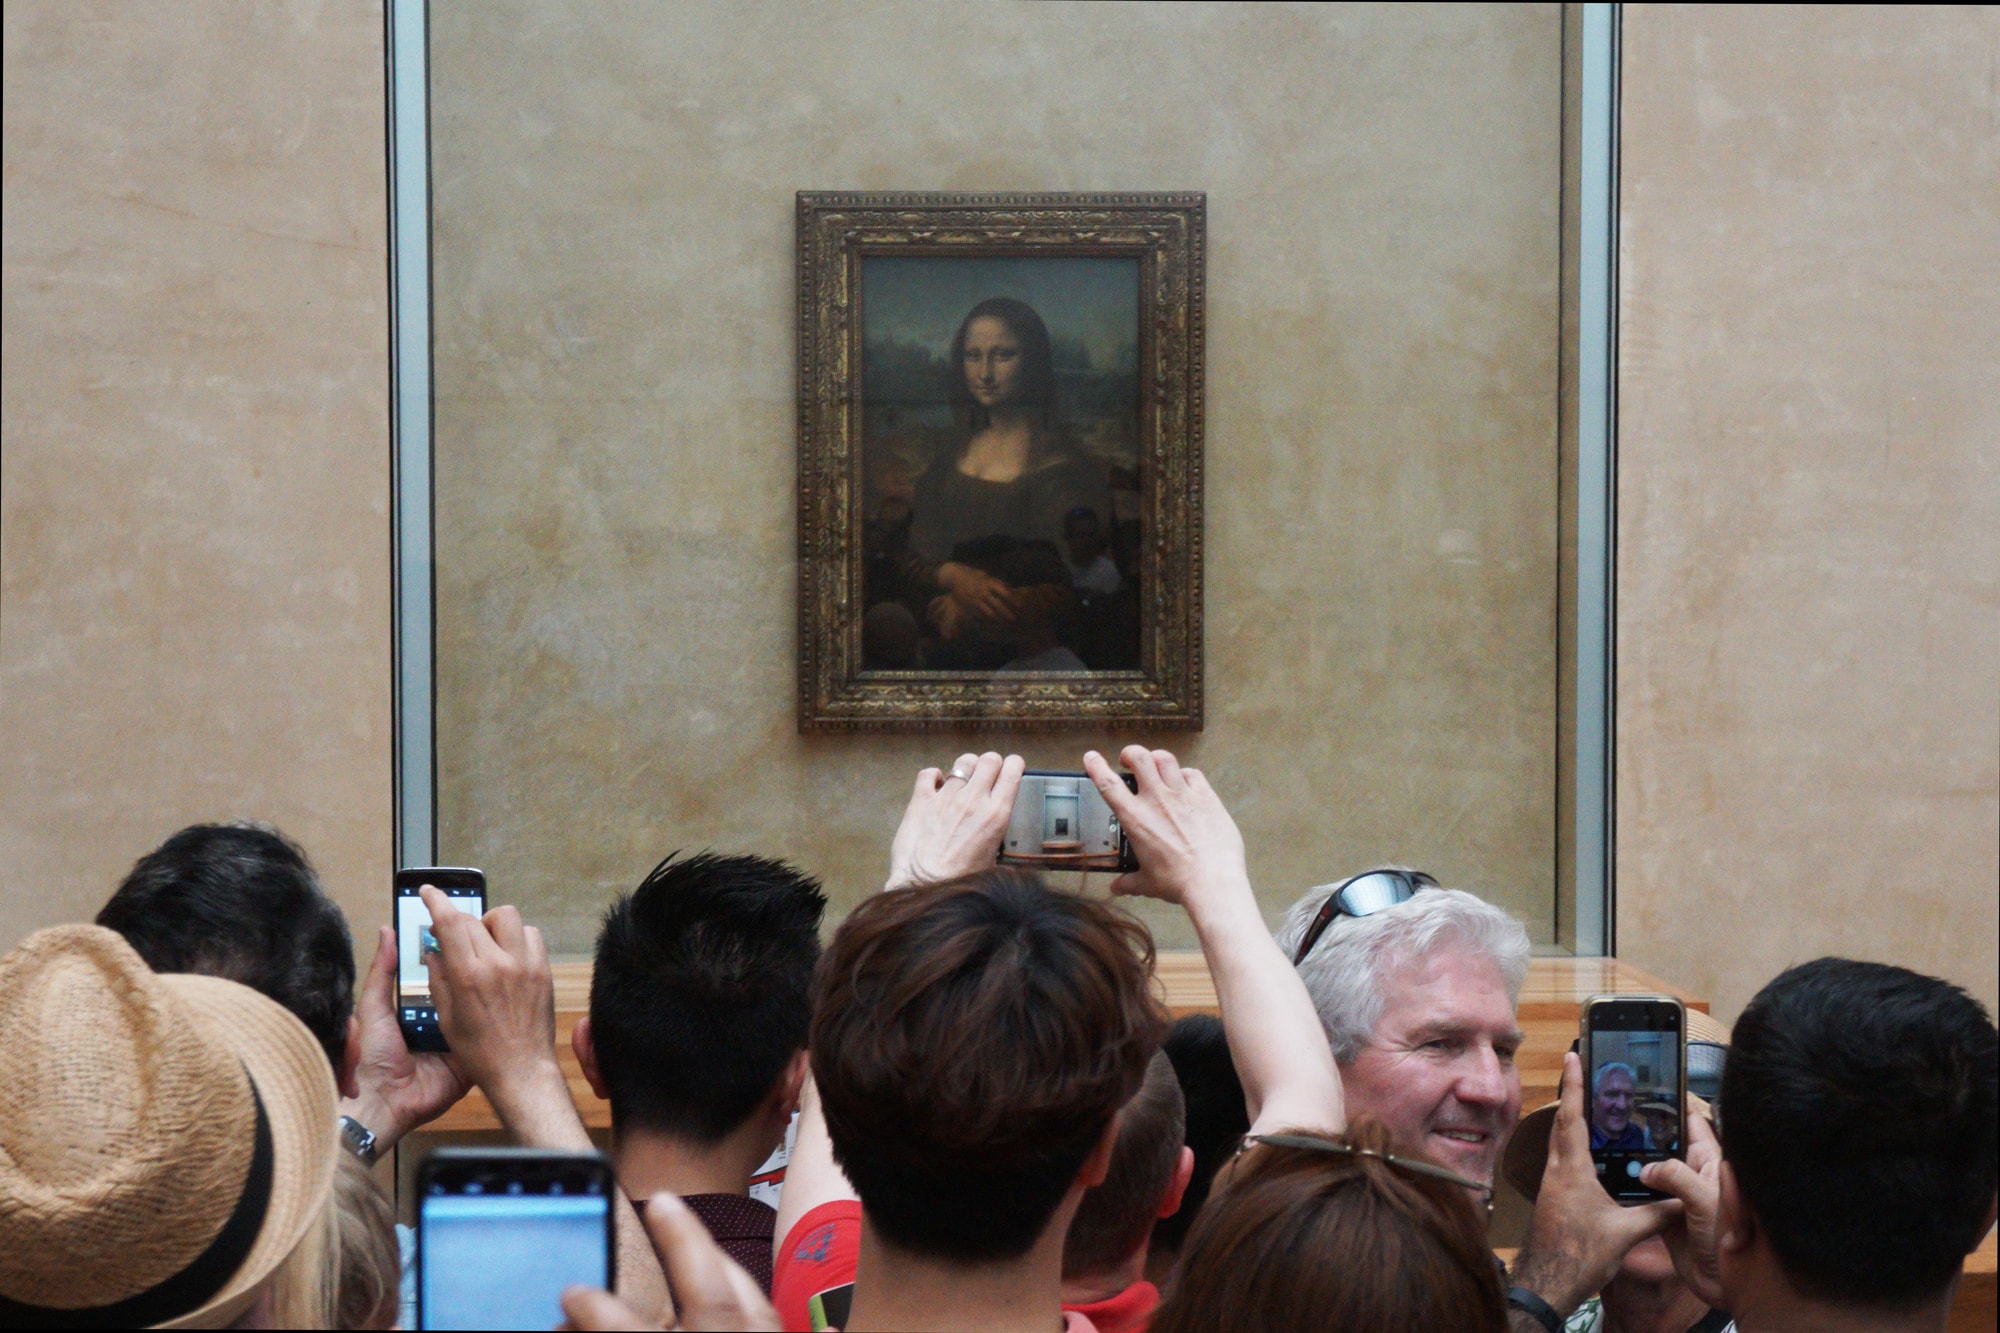 The Louvre is Considering Moving 'Mona Lisa'